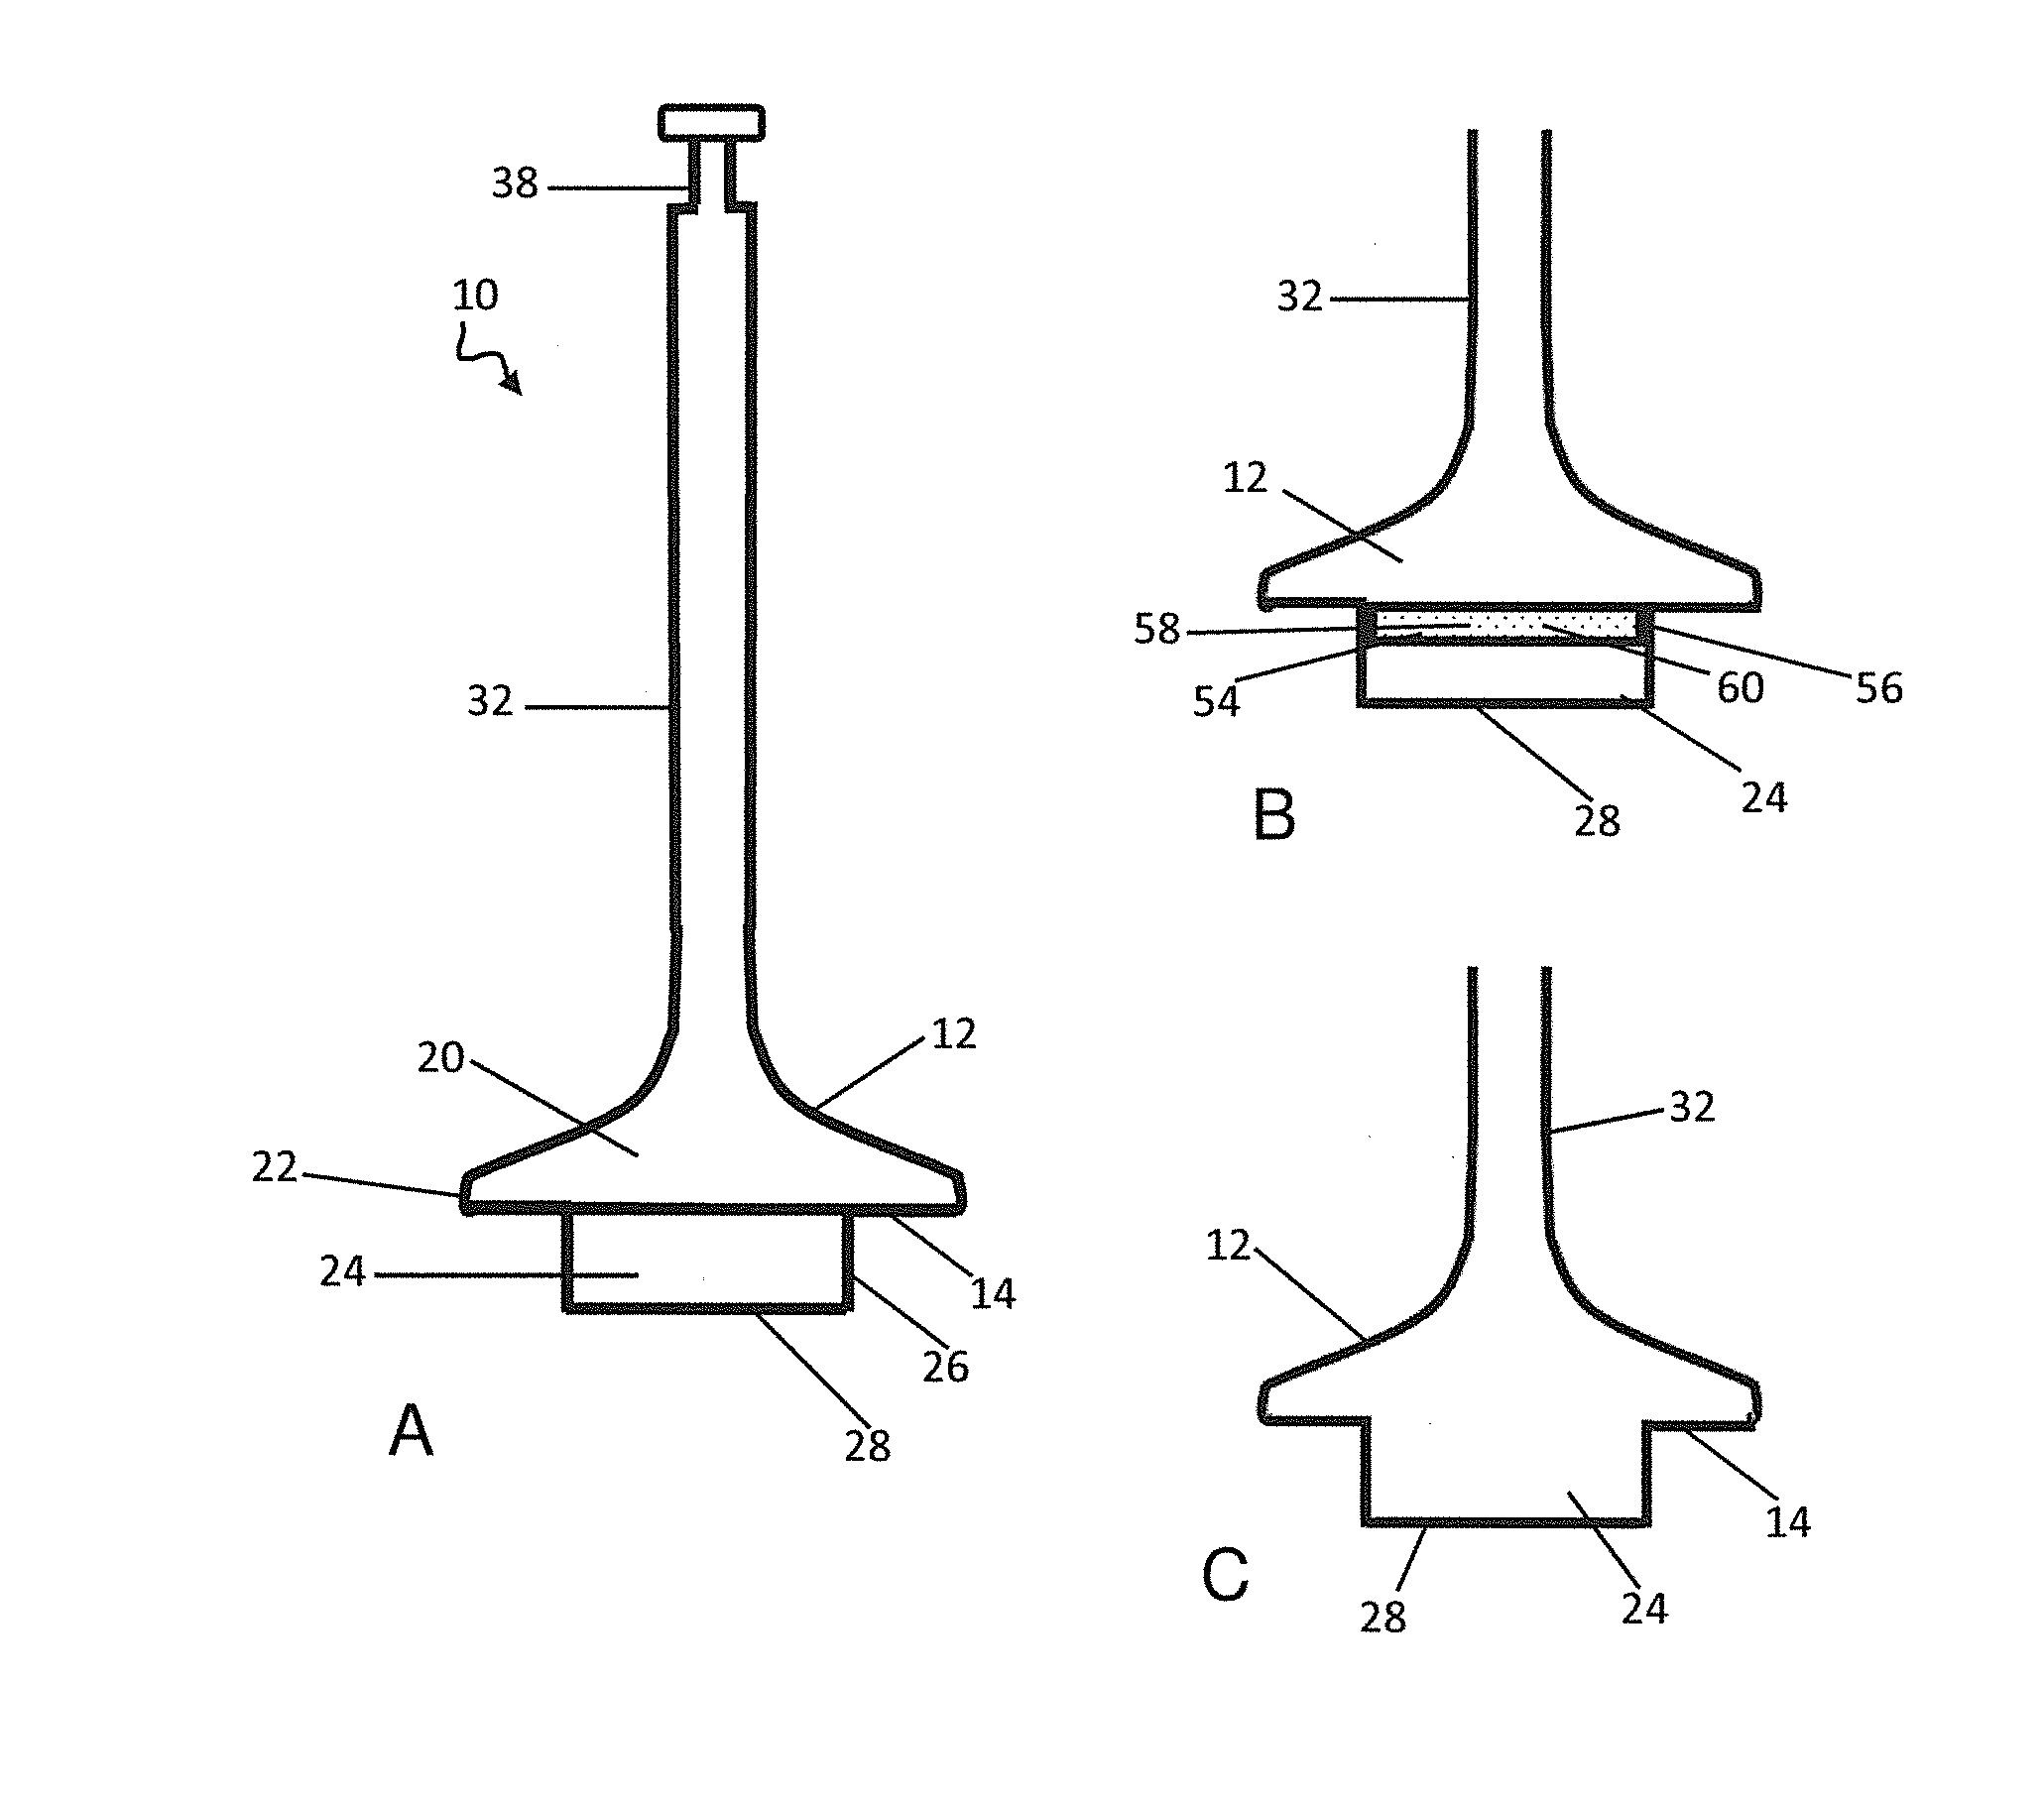 Heat transferring engine valve for fuel conservation